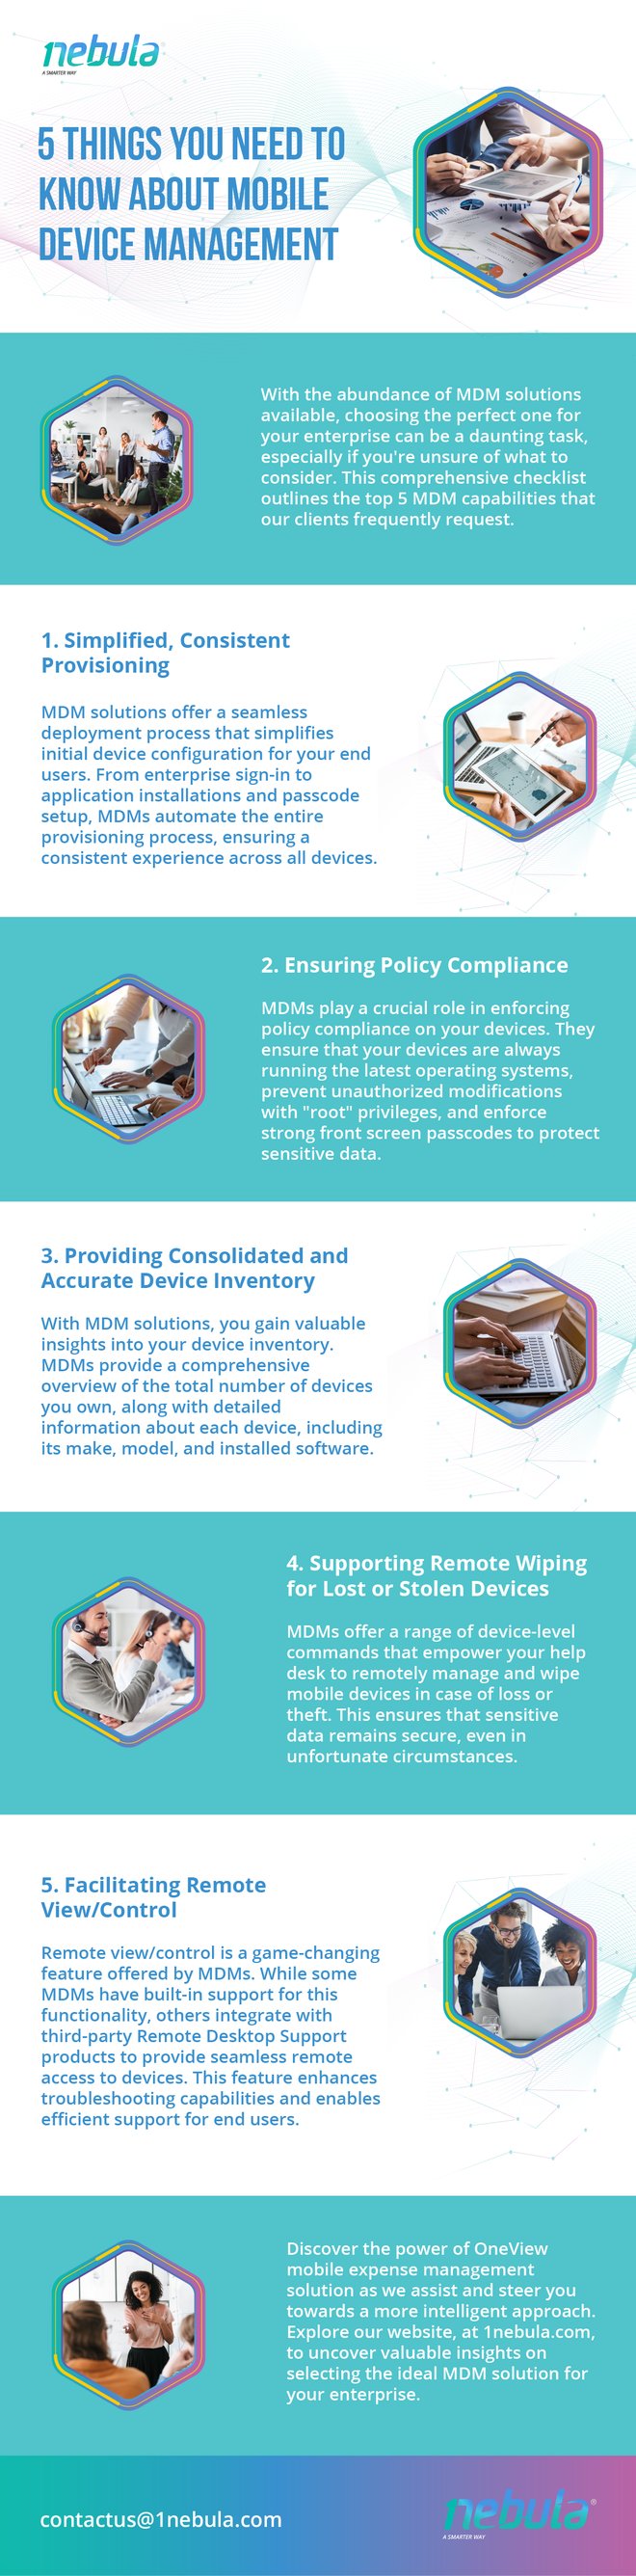 11 Dec Infographic_5 Things you need to know about mobile device management-01